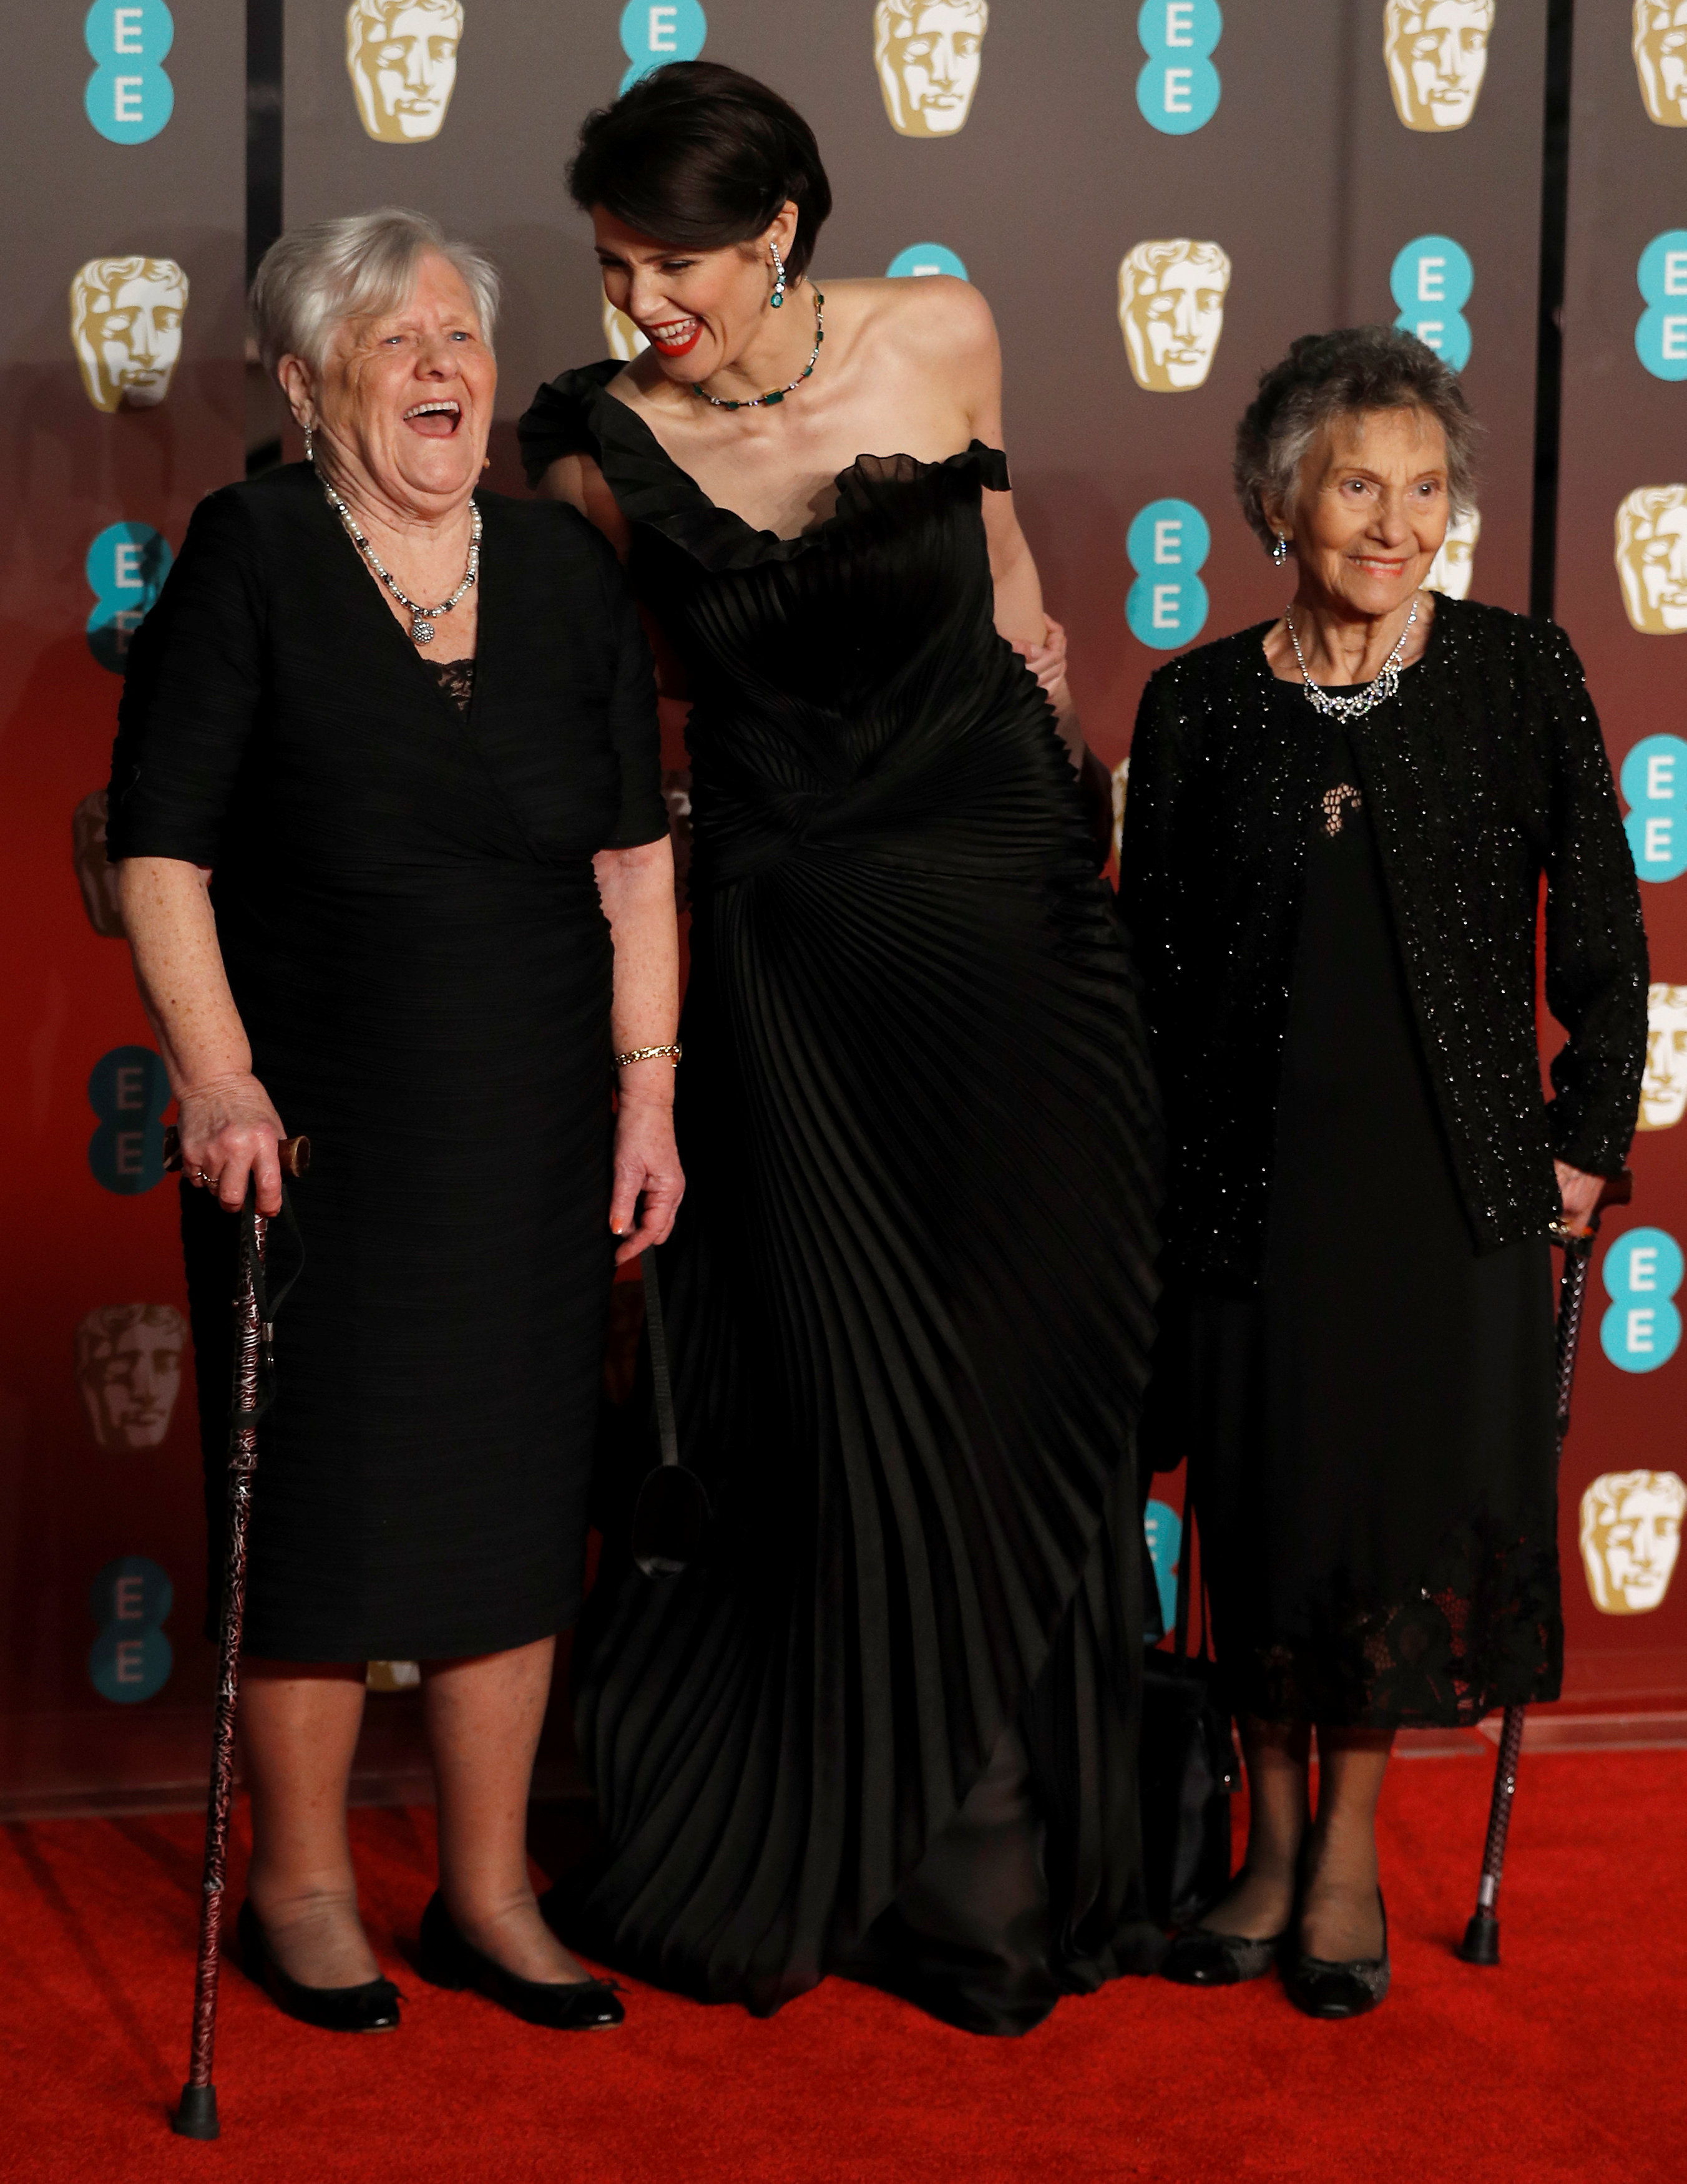 Stars join forces with activists on BAFTA awards red carpet